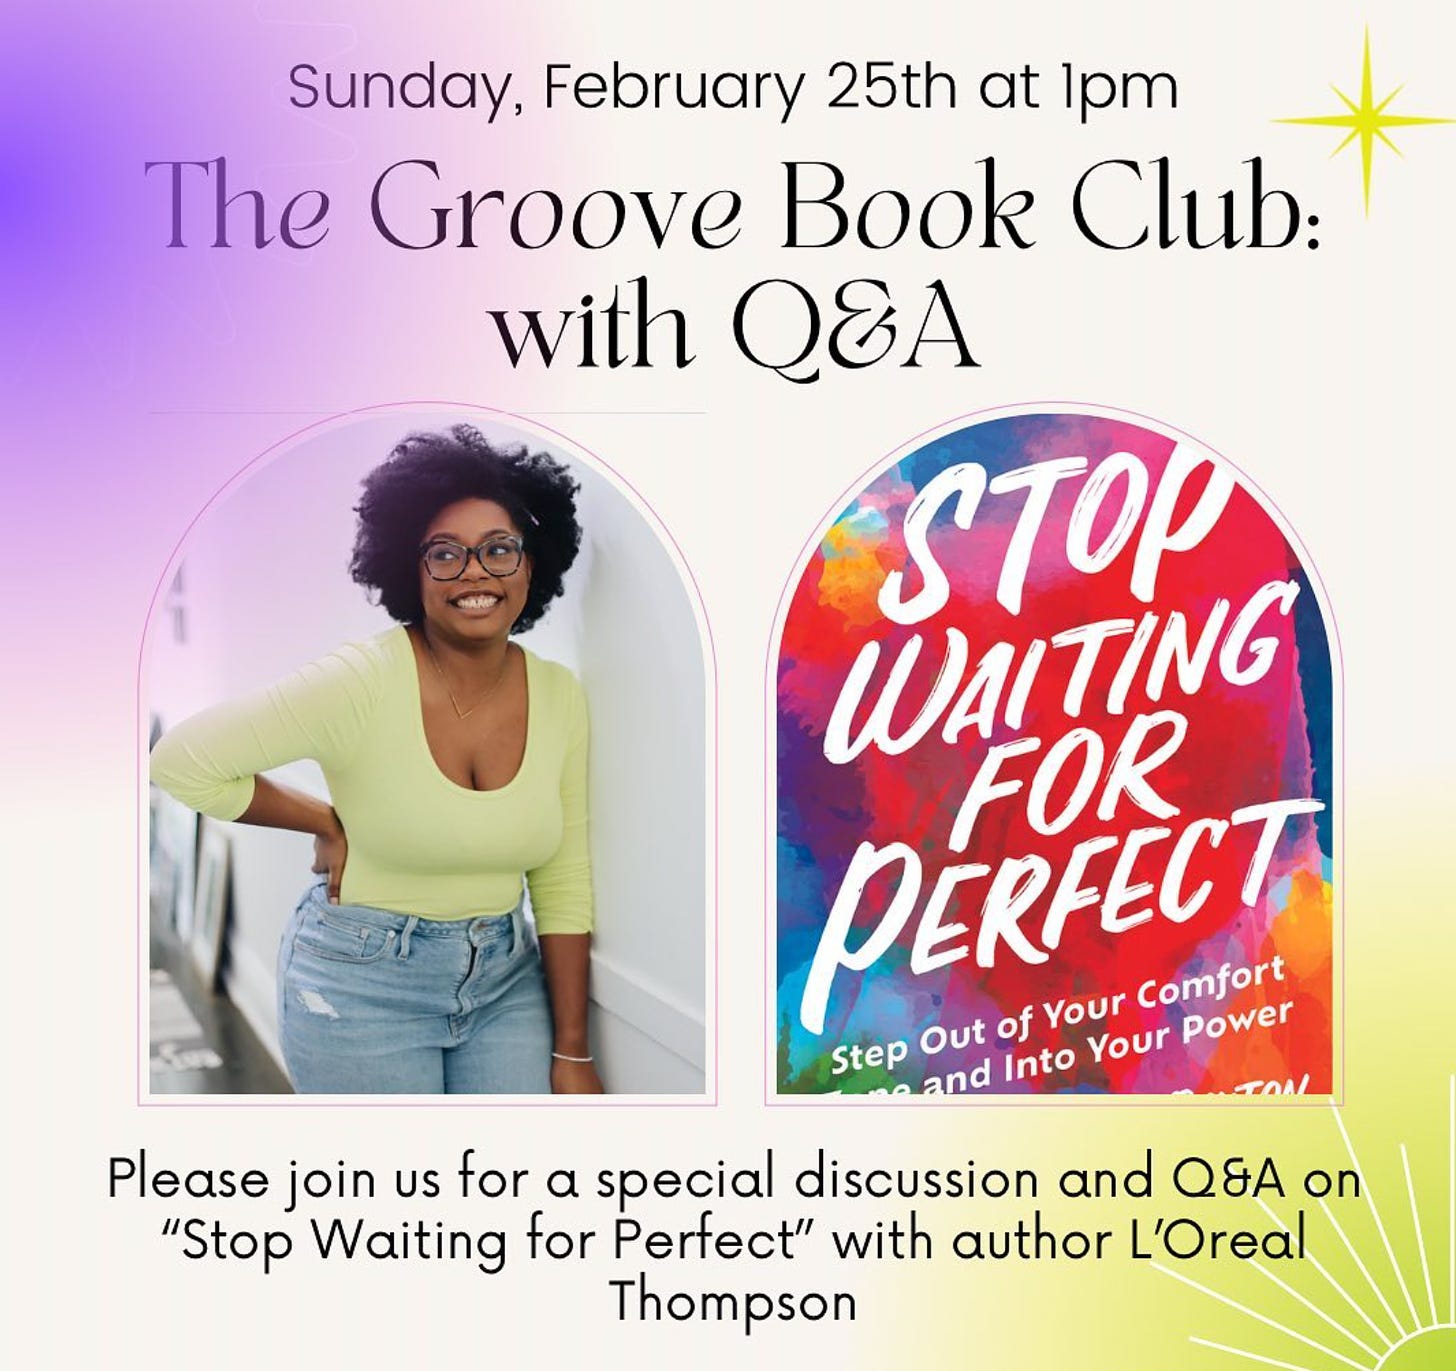 Infographic promoting a book club on Sunday, Feb. 25 at The Groove Chicago